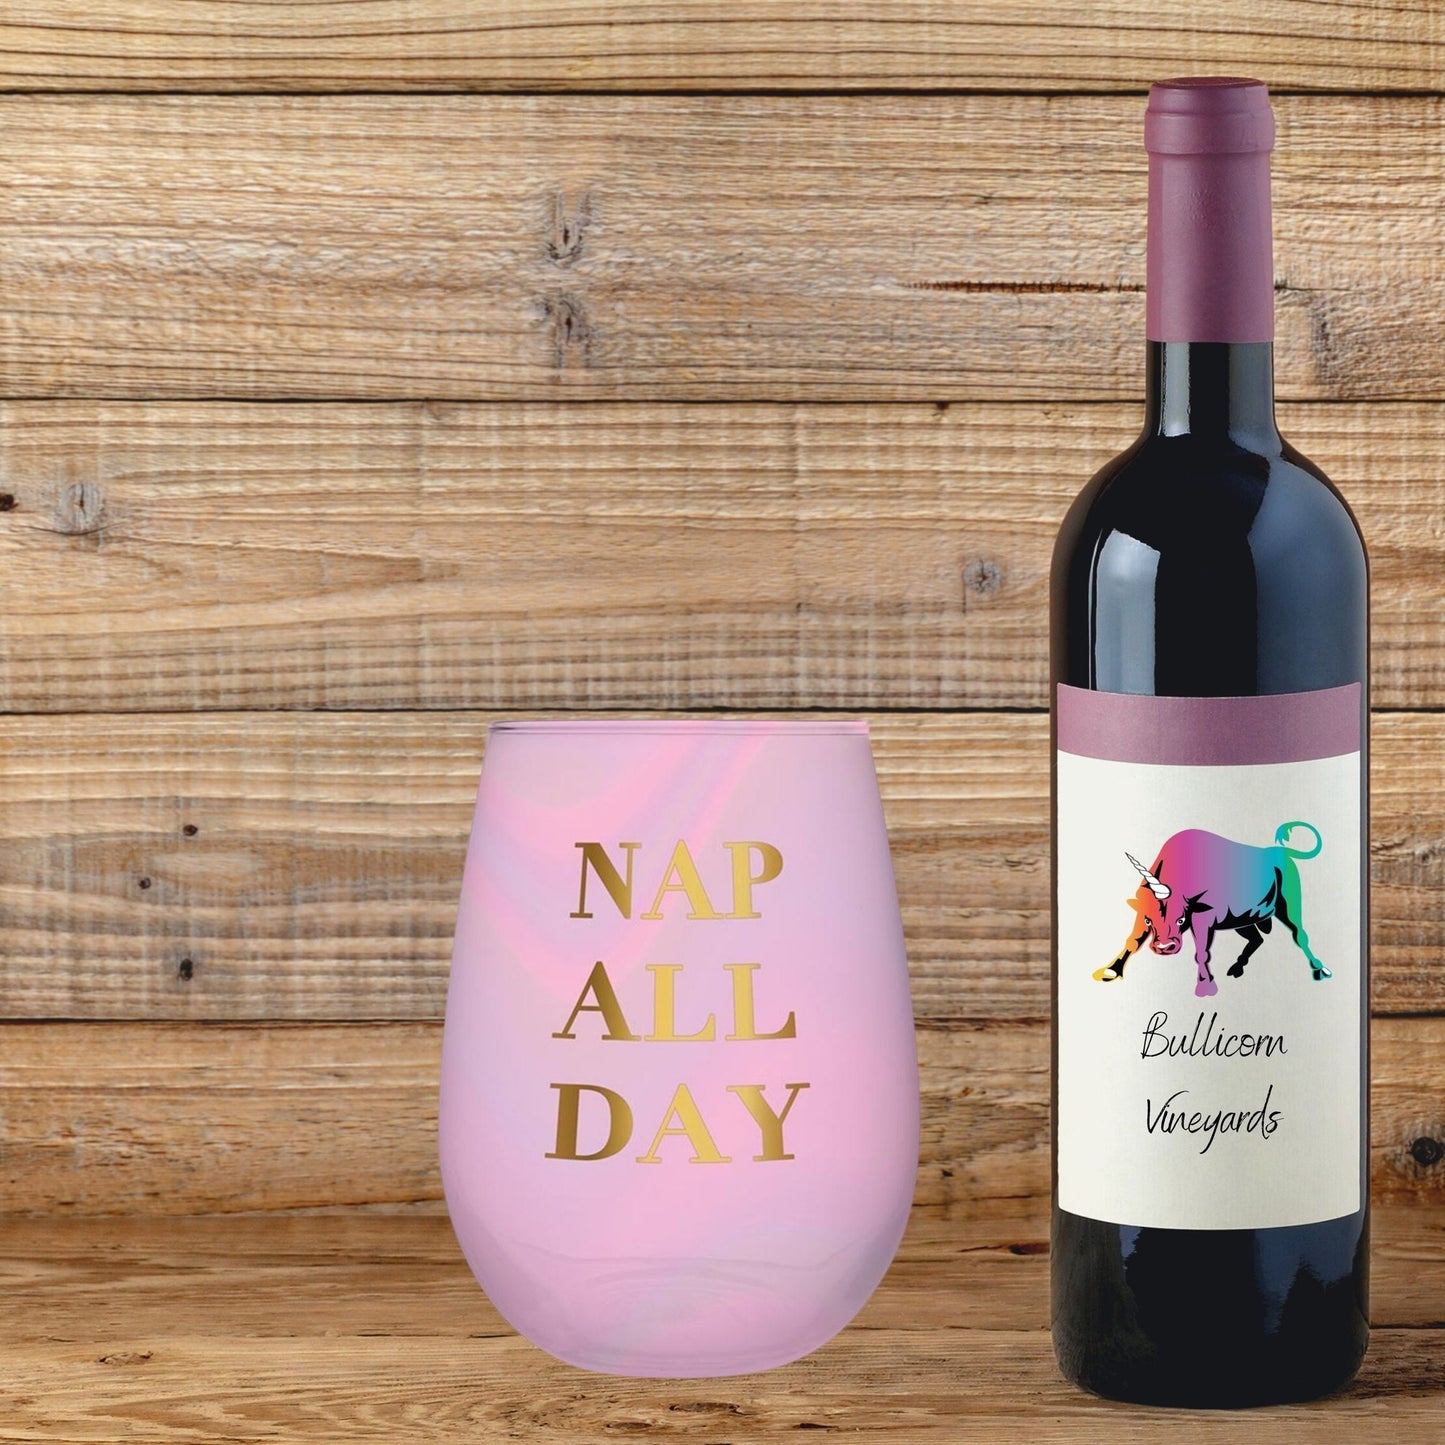 Set of 6 Nap All Day Stemless Wine Glass in Iridescent Tinted Pink | 20 oz.